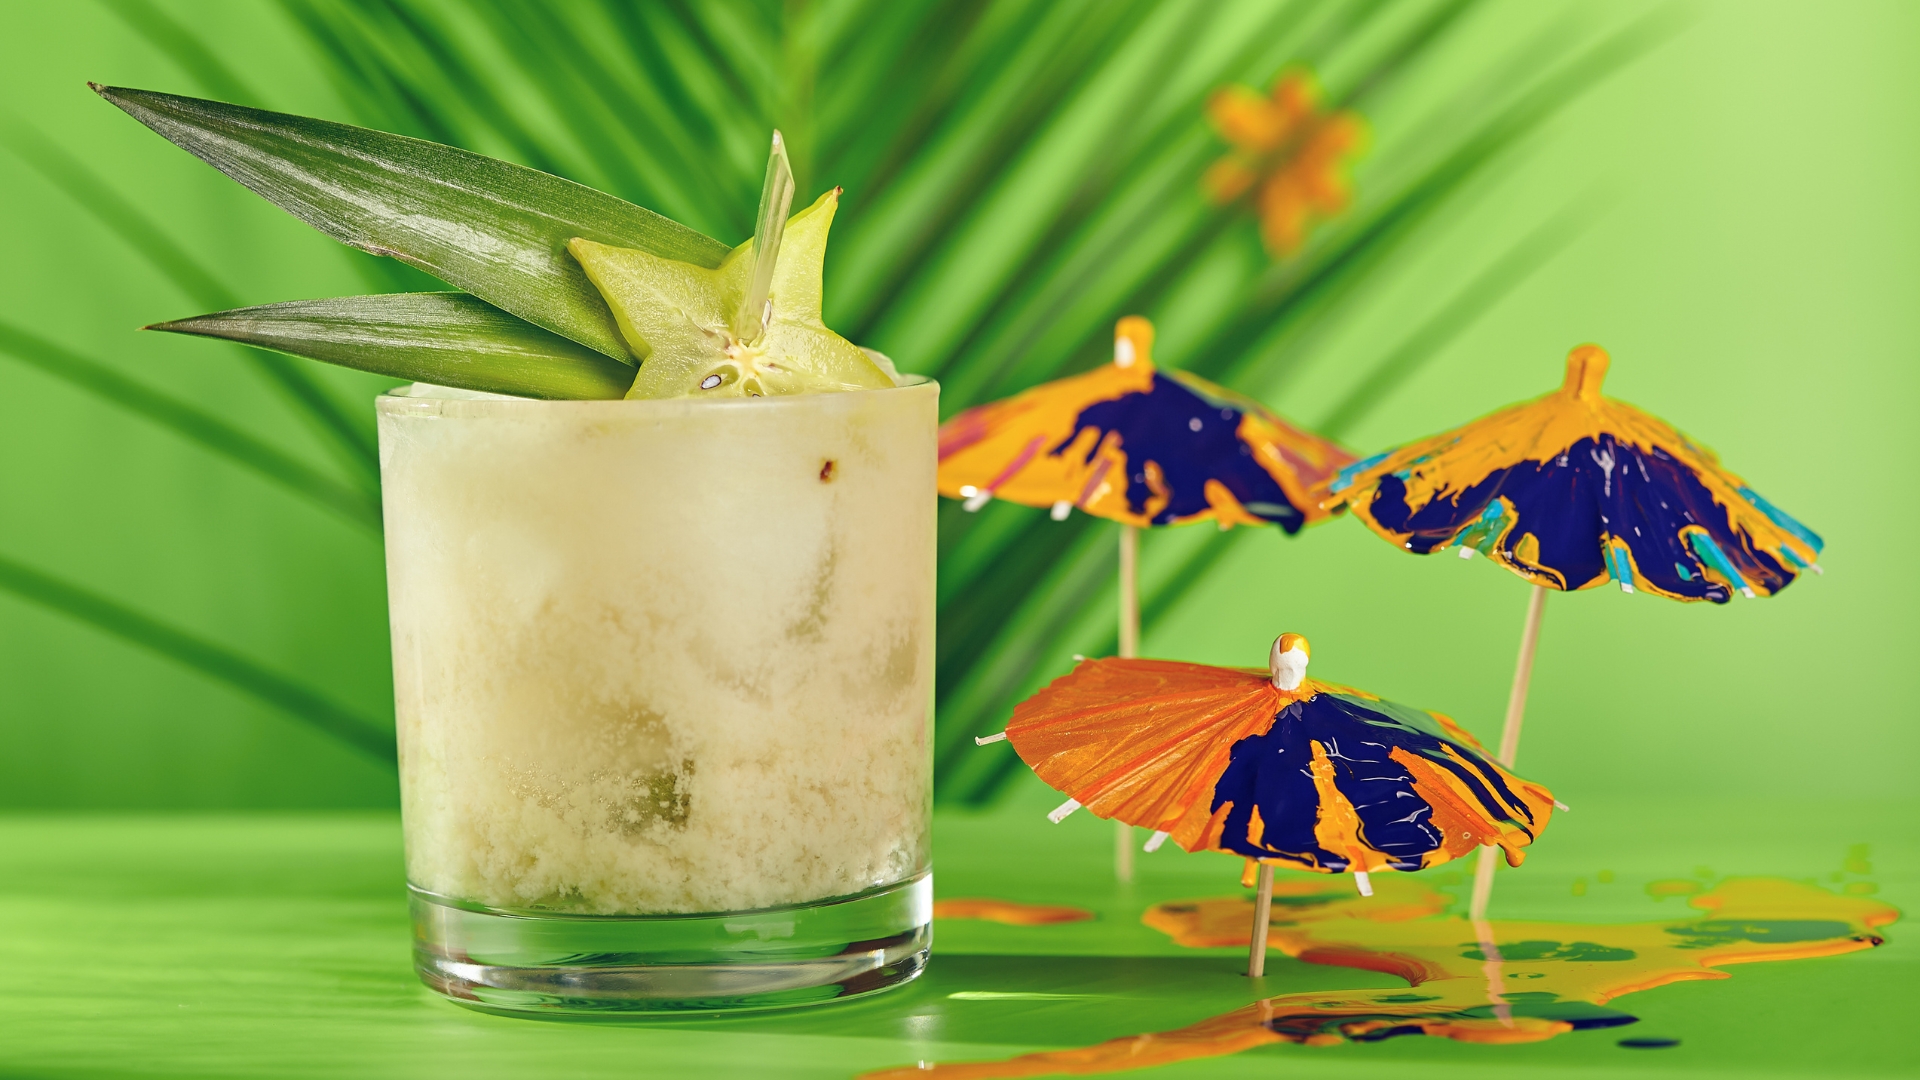 Exotic cocktail with a star fruit garnish and pineapple stems with a green background and orange and purple cocktail umbrellas.